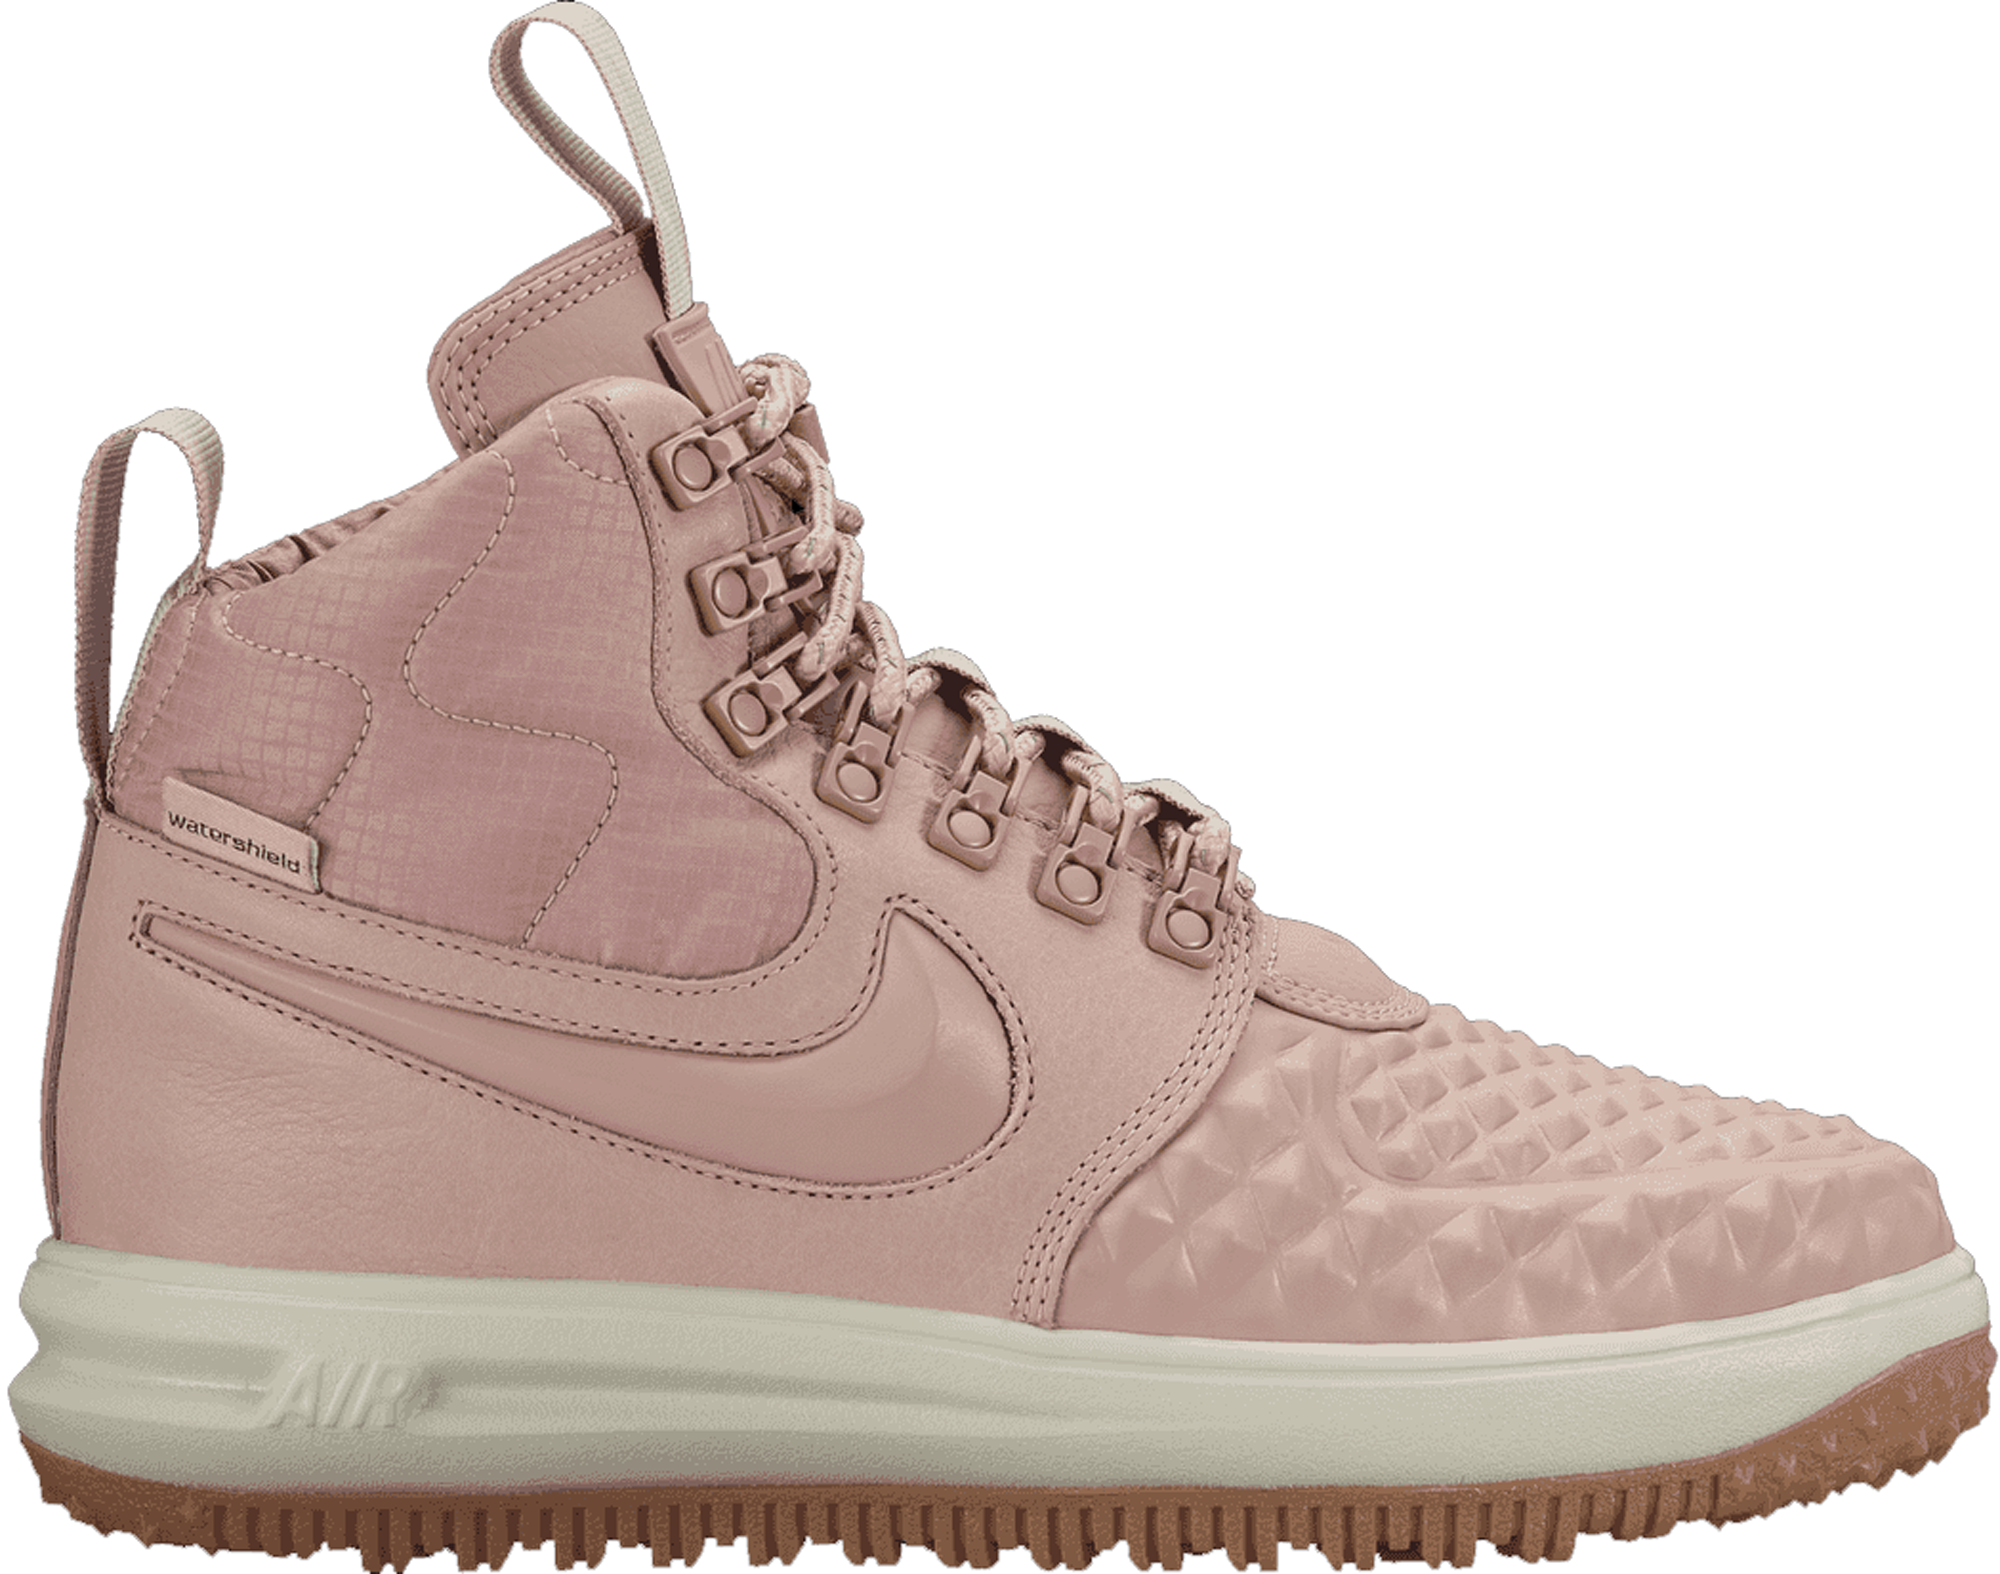 Nike Lunar Force 1 Duckboot Particle 